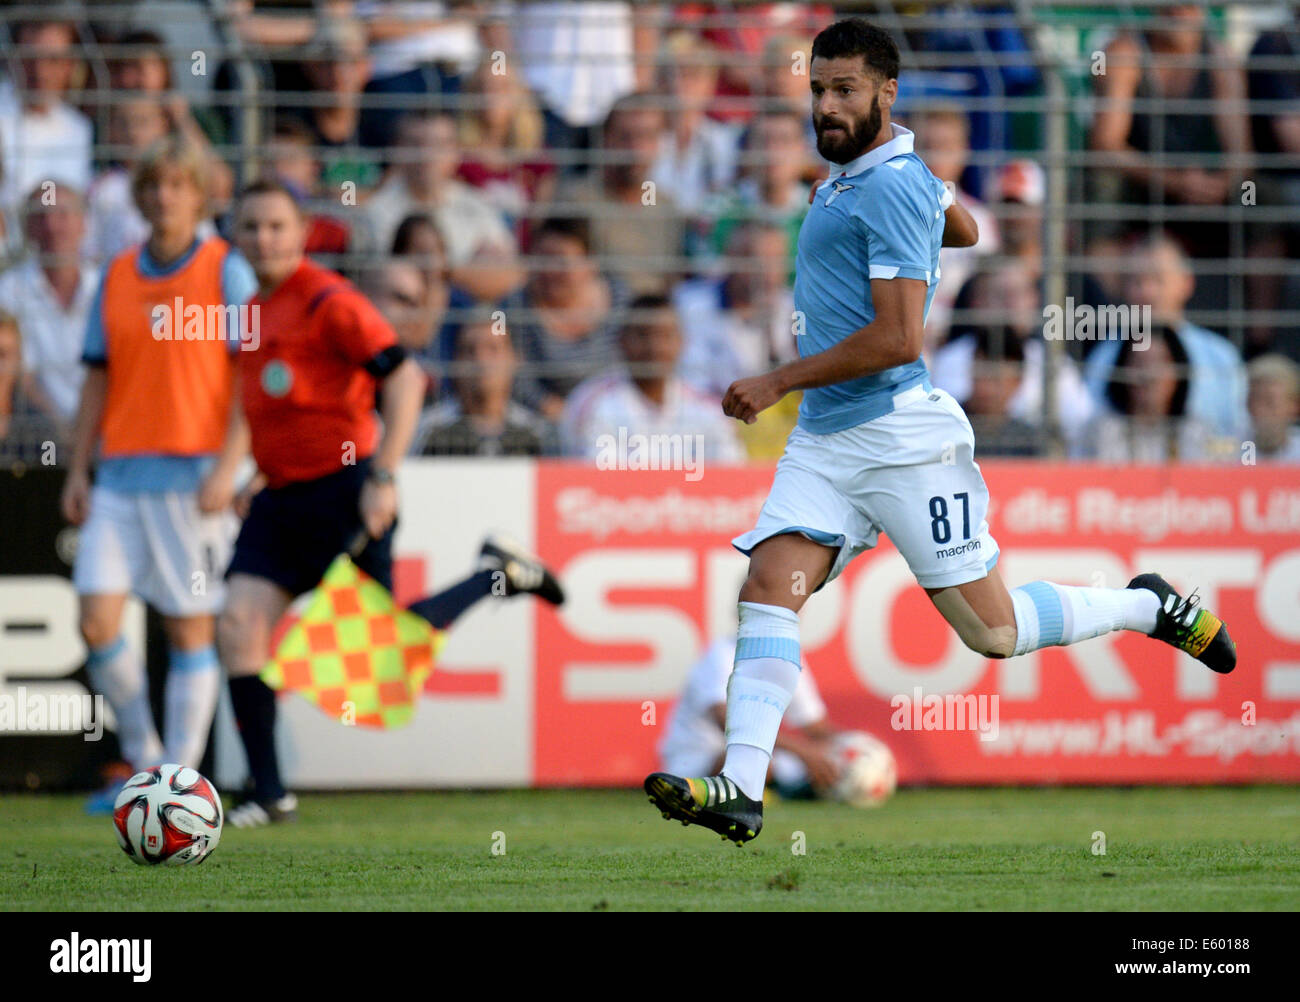 Luebeck, Germany. 08th Aug, 2014. Rome's Antonio Candreva in action during the soccer test match between Hamburger SV and S.S. Lazio Rome at Stadium at the Lohmuehle in Luebeck, Germany, 08 August 2014. Photo: Daniel Reinhardt/dpa/Alamy Live News Stock Photo